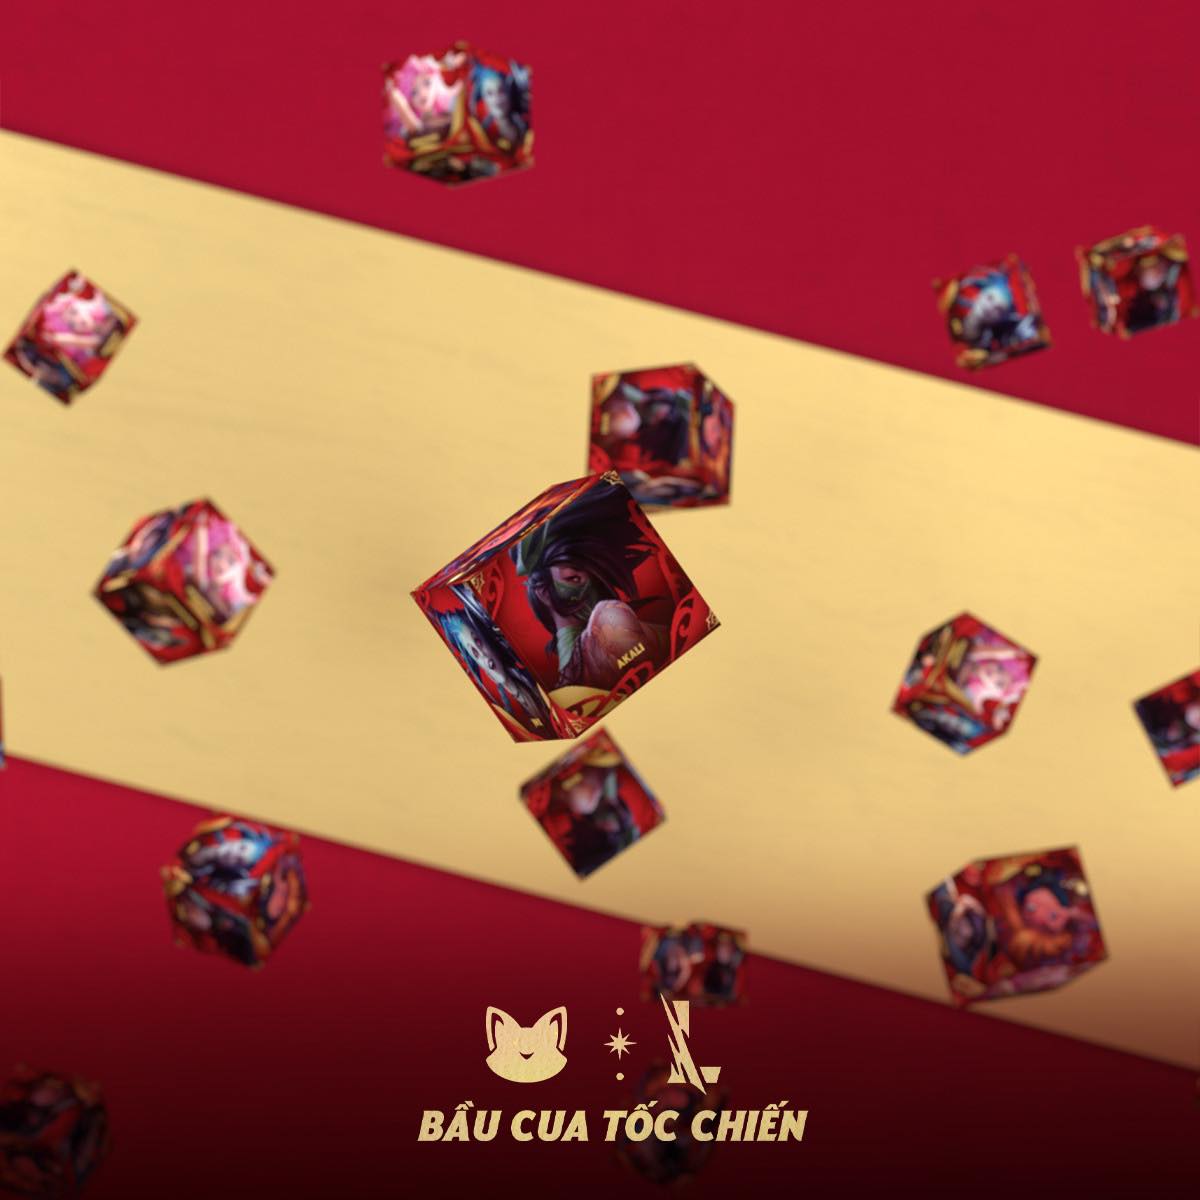 And Bau Cua with champion icons in League of Legends.